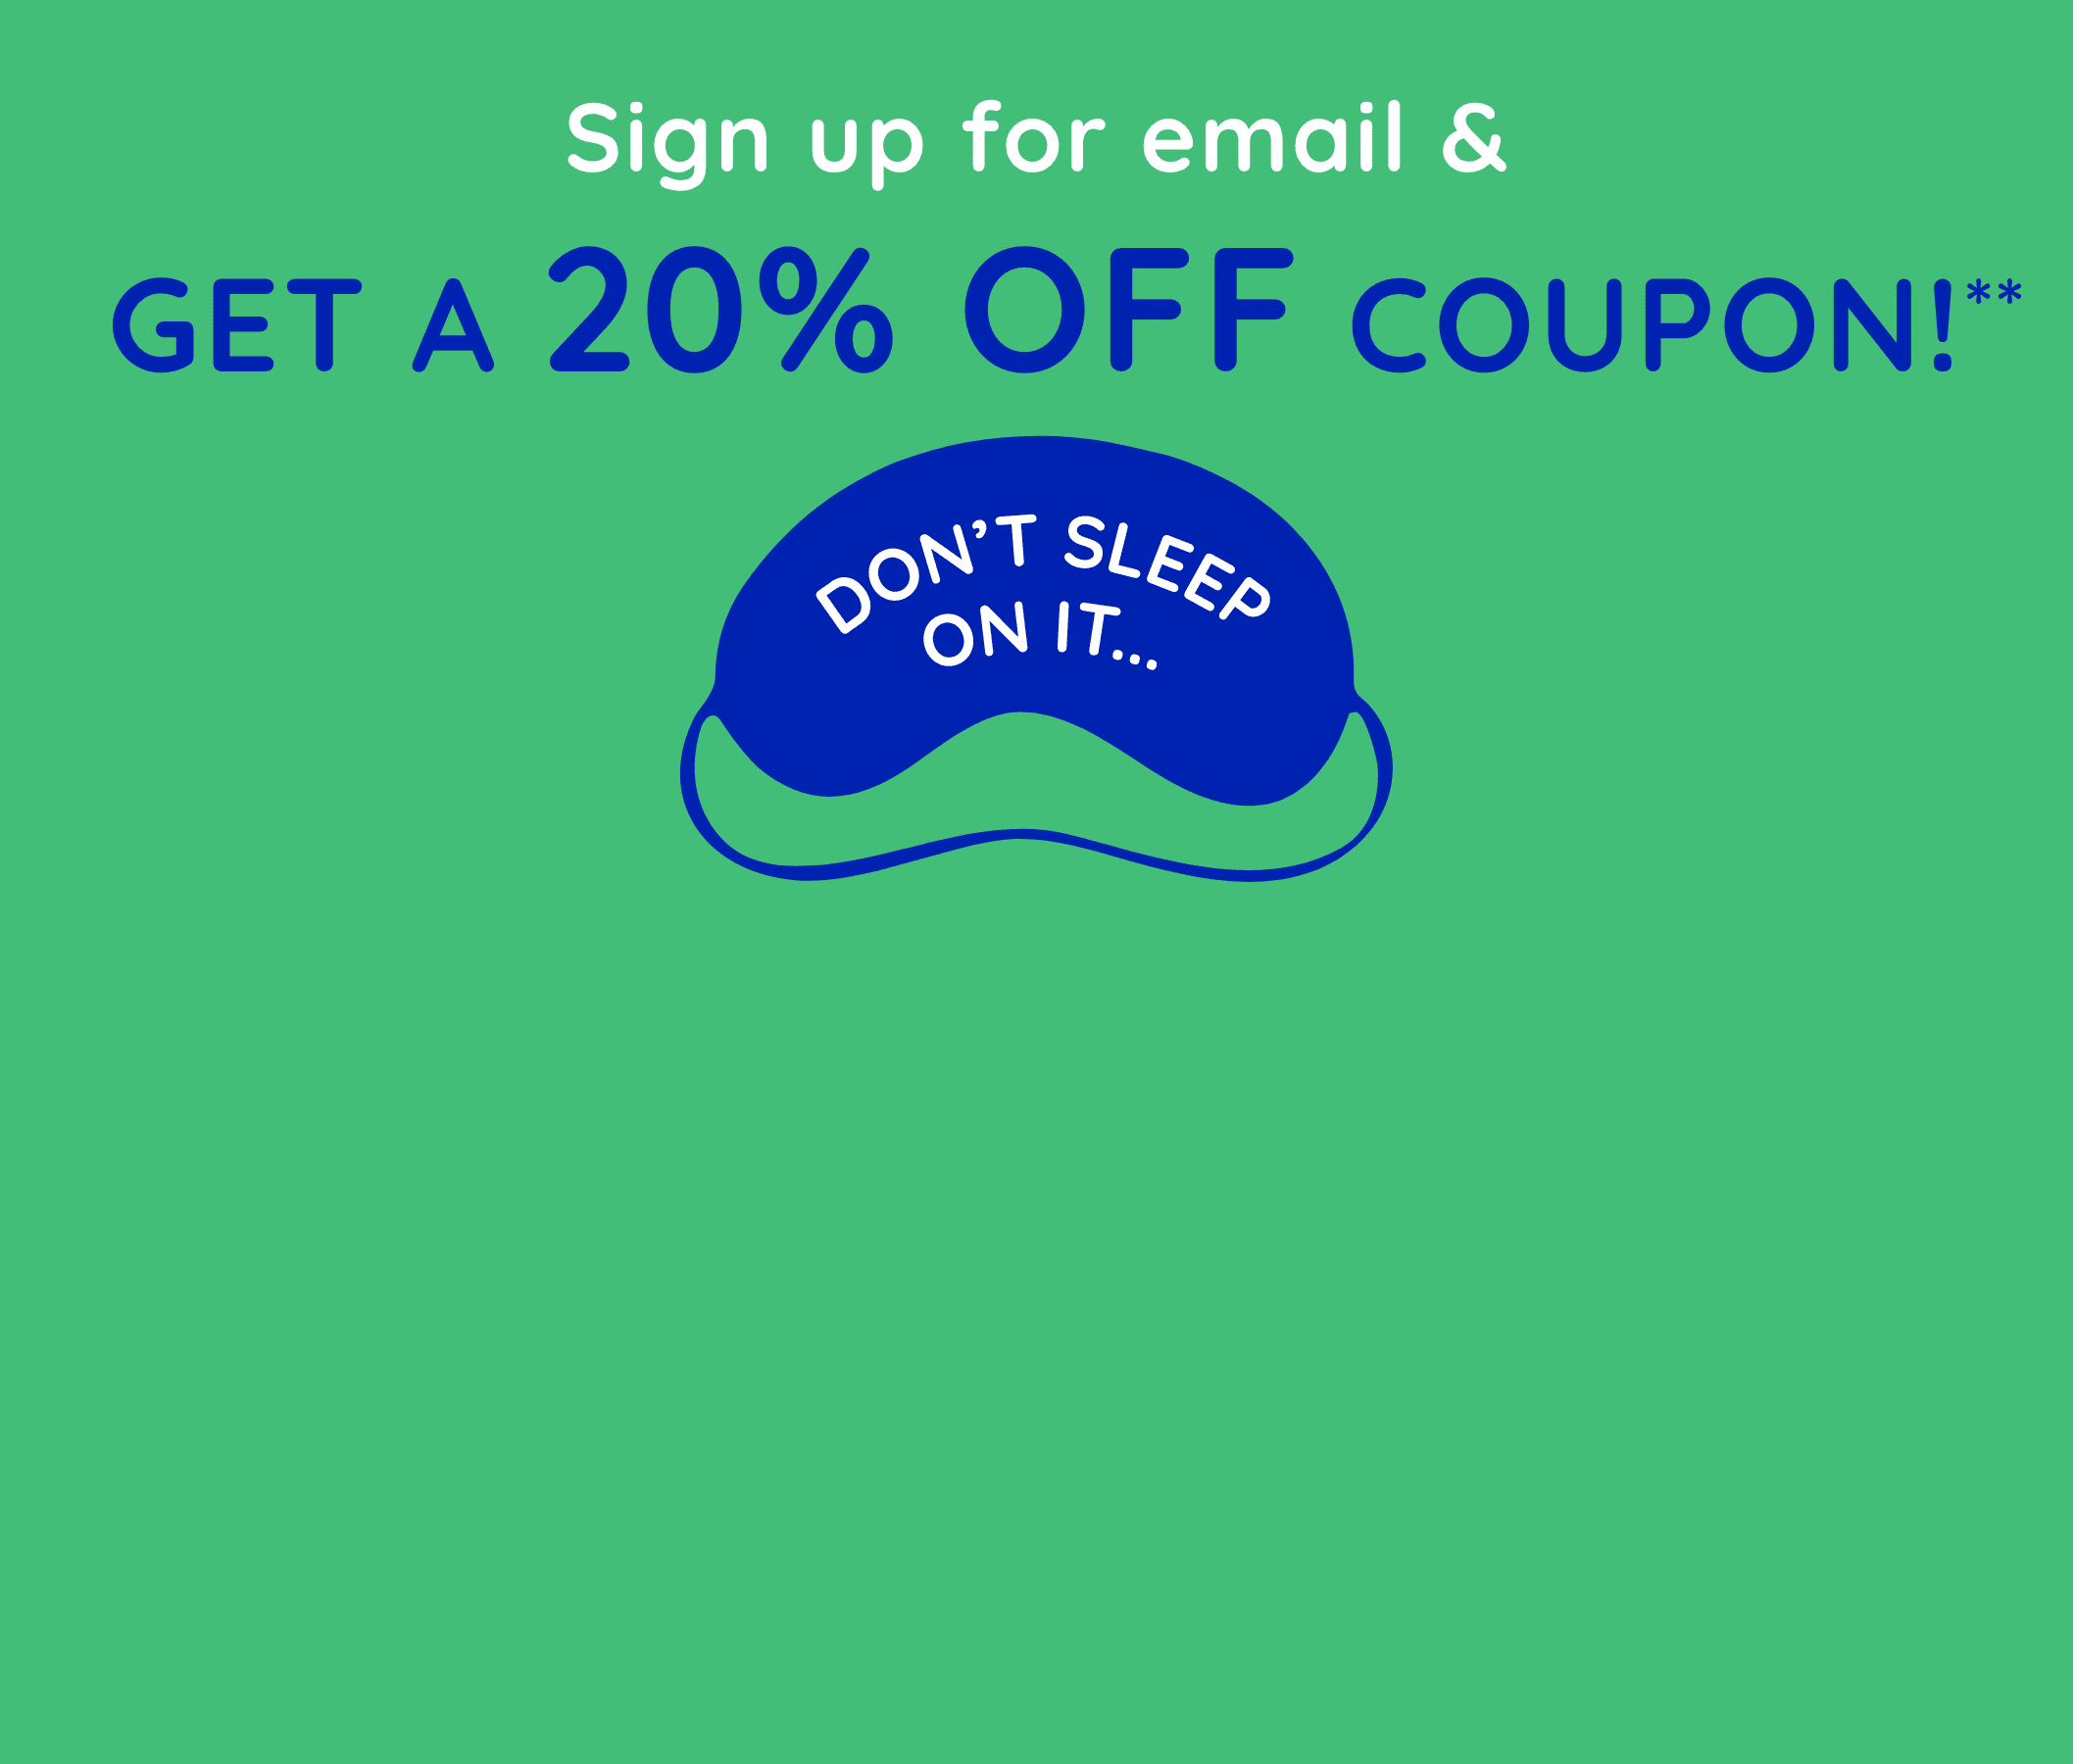 Sign up for email and GET A 20% OFF COUPON!